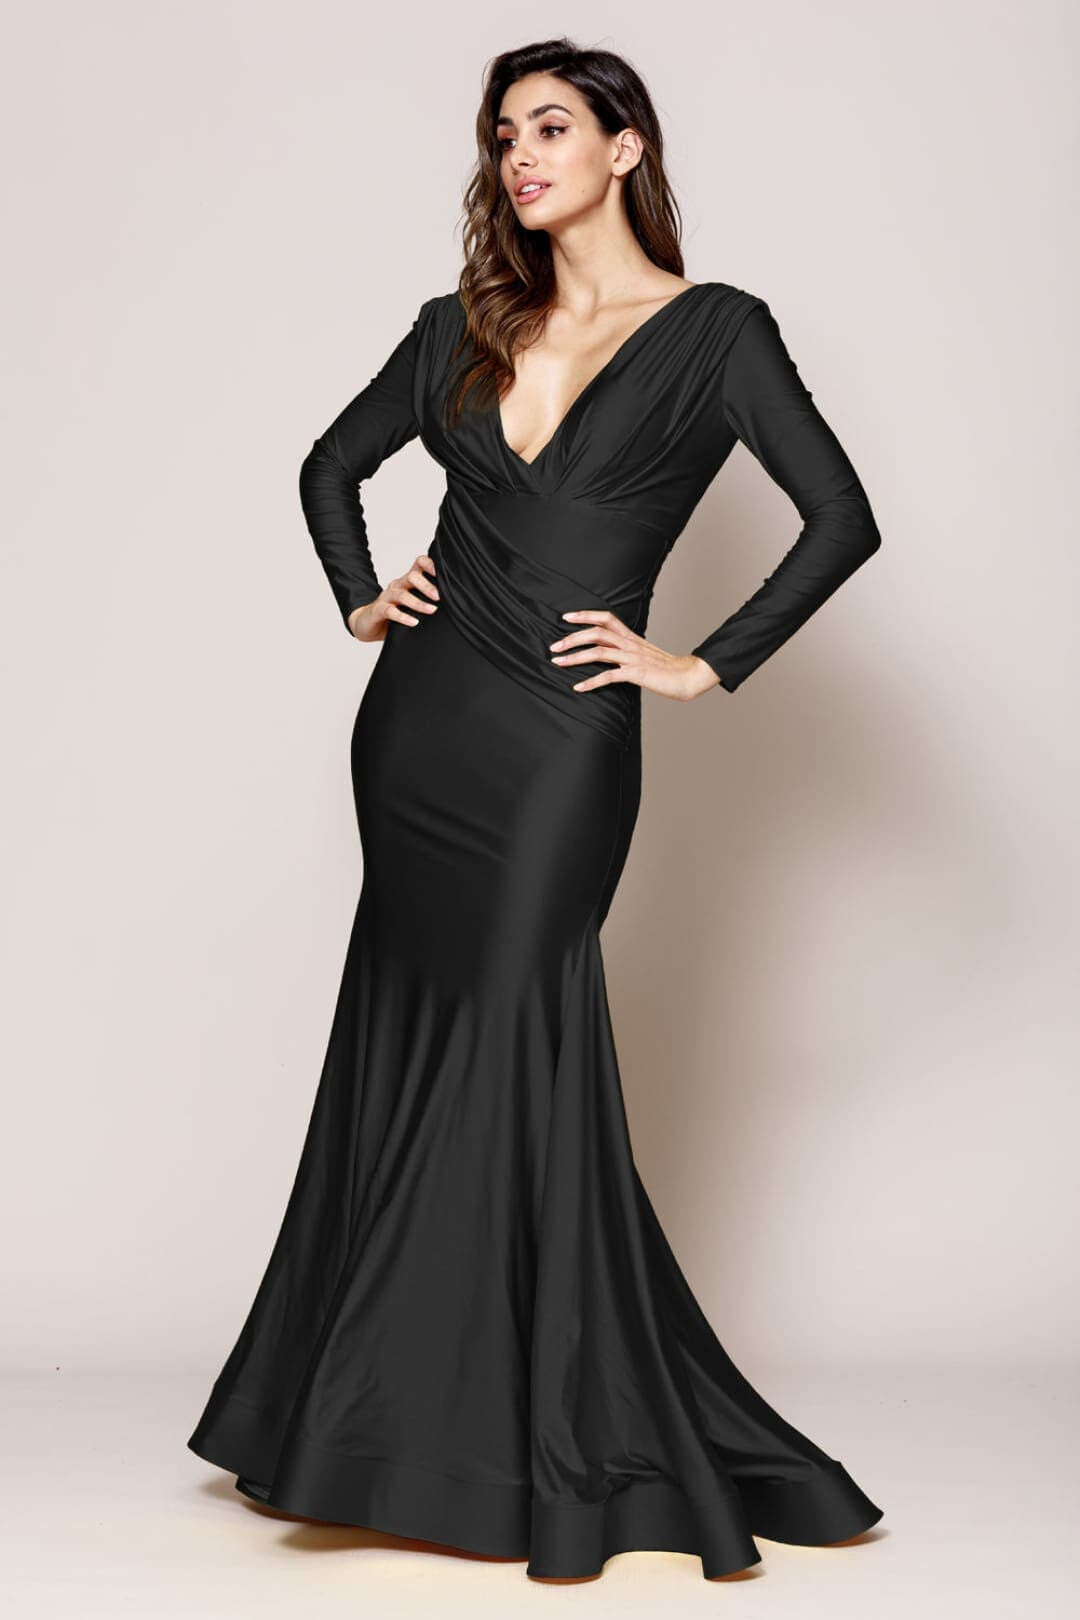 Stretchy Evening Prom Gown - BLACK / 2